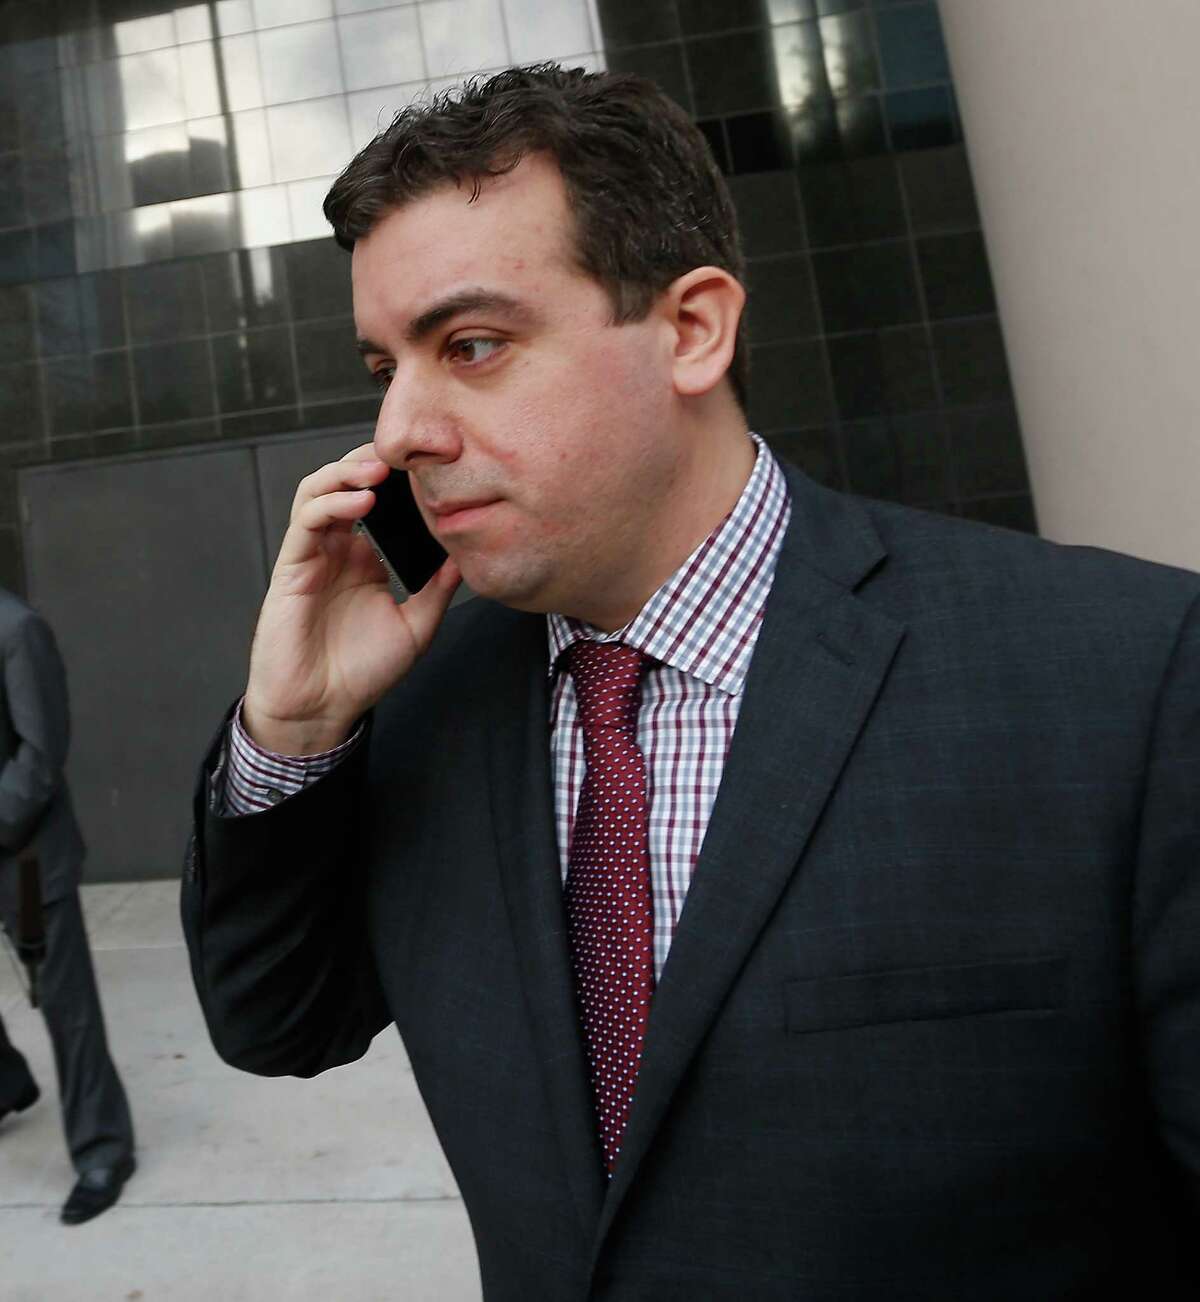 Chris Correa, the former director of scouting for the St. Louis Cardinals, leaves the Bob Casey Federal Courthouse, Friday, Jan. 8, 2016, in Houston. Correa pleaded guilty to five counts of unauthorized access of a protected computer, access authorities said dated back several years. (AP Photo/Bob Levey)